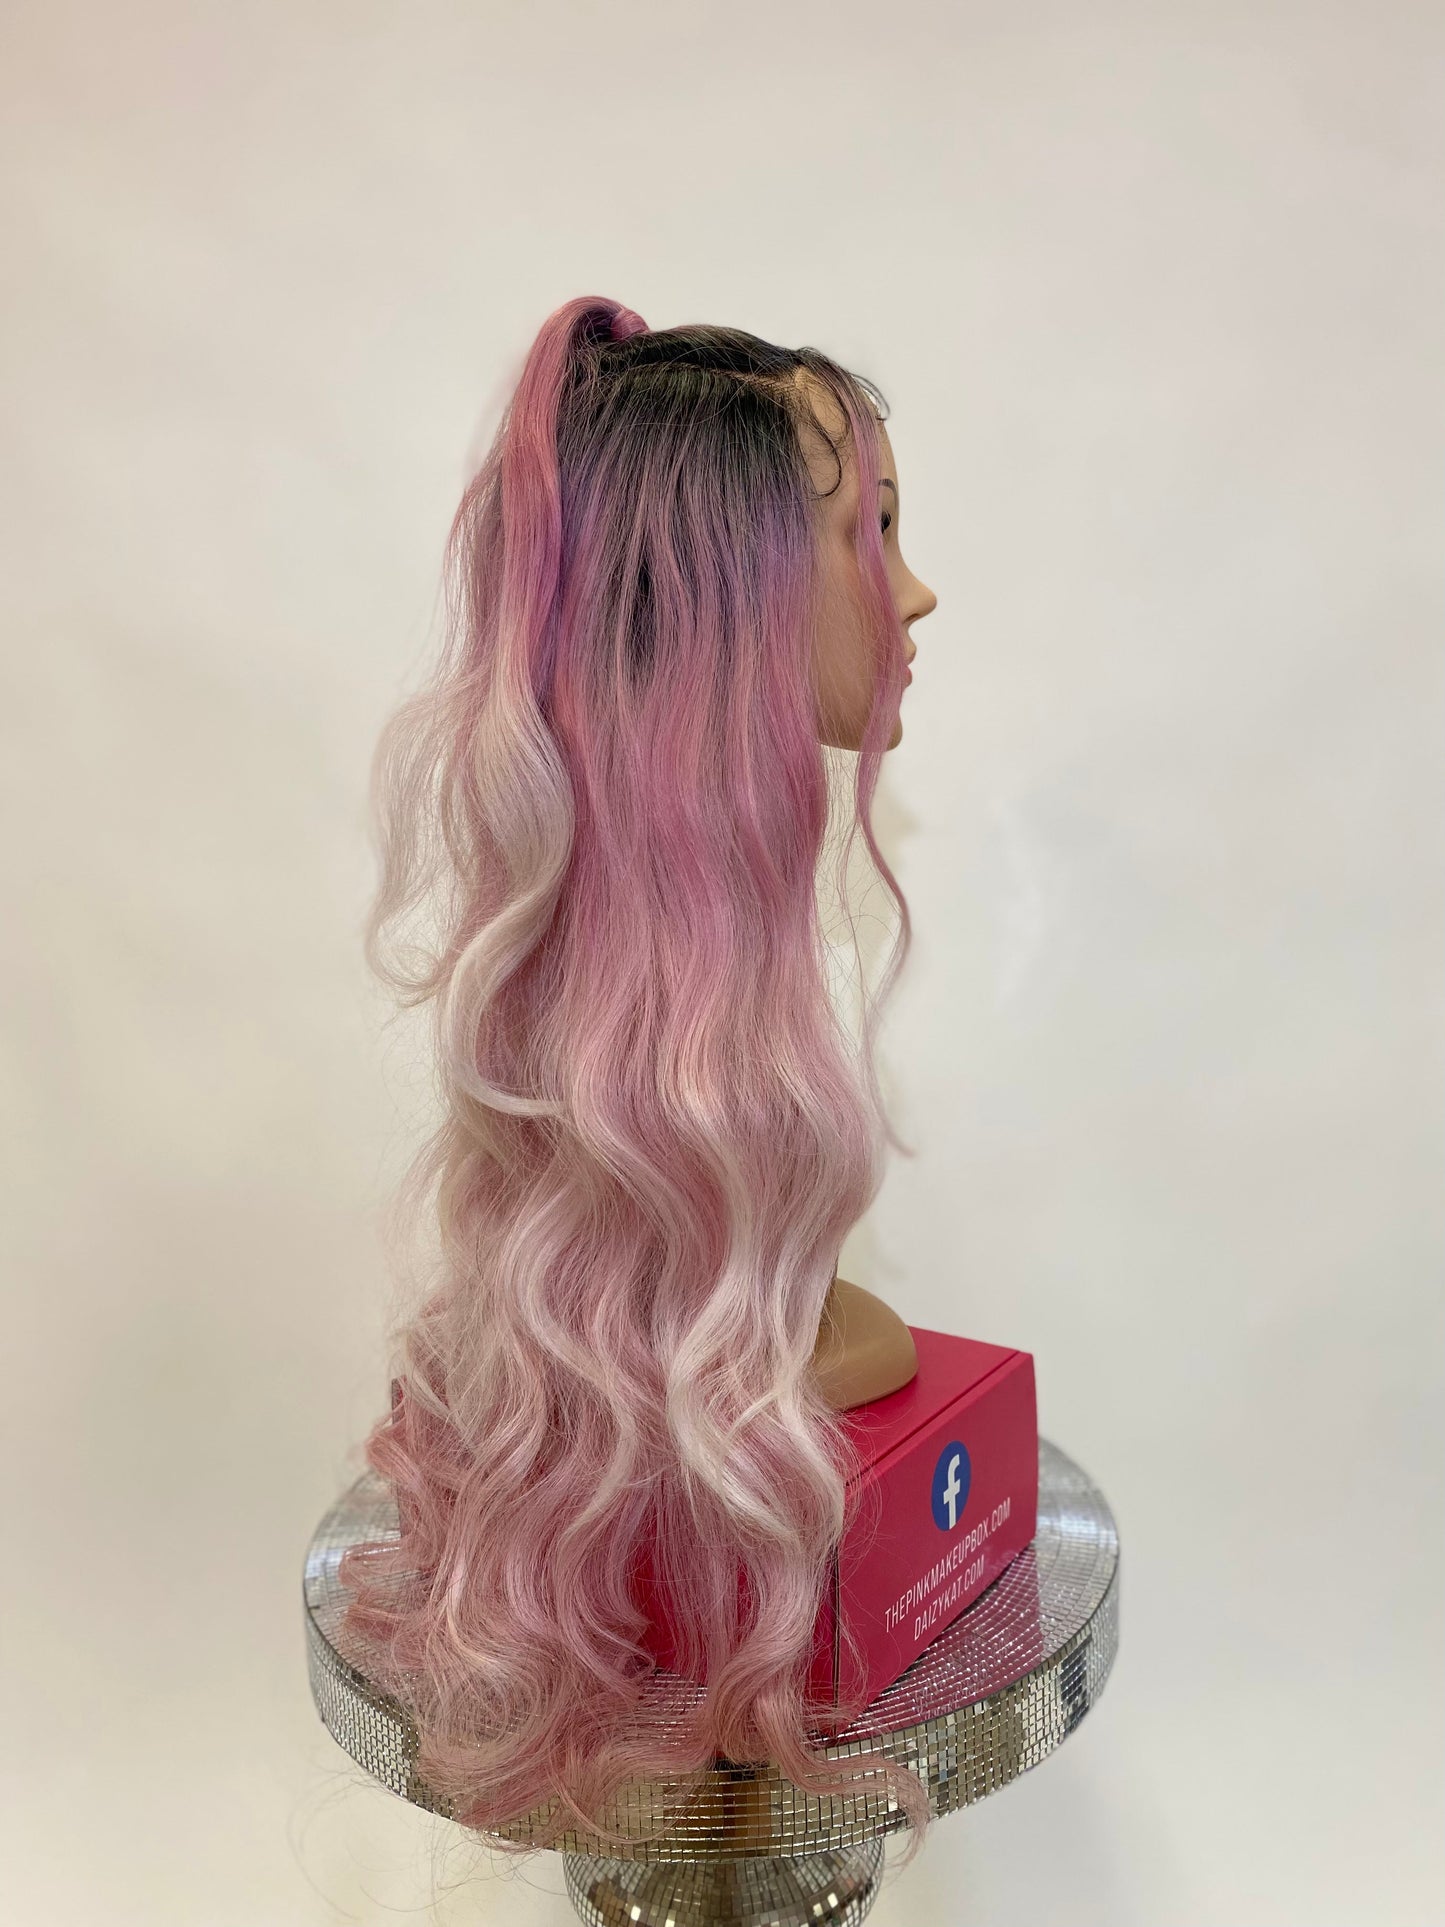 356 Ariana - 13x2 & 360 Top Pony Lace Front Wig - 1B/PINK - DaizyKat Cosmetics 356 Ariana - 13x2 & 360 Top Pony Lace Front Wig - 1B/PINK DaizyKat Cosmetics WIGS